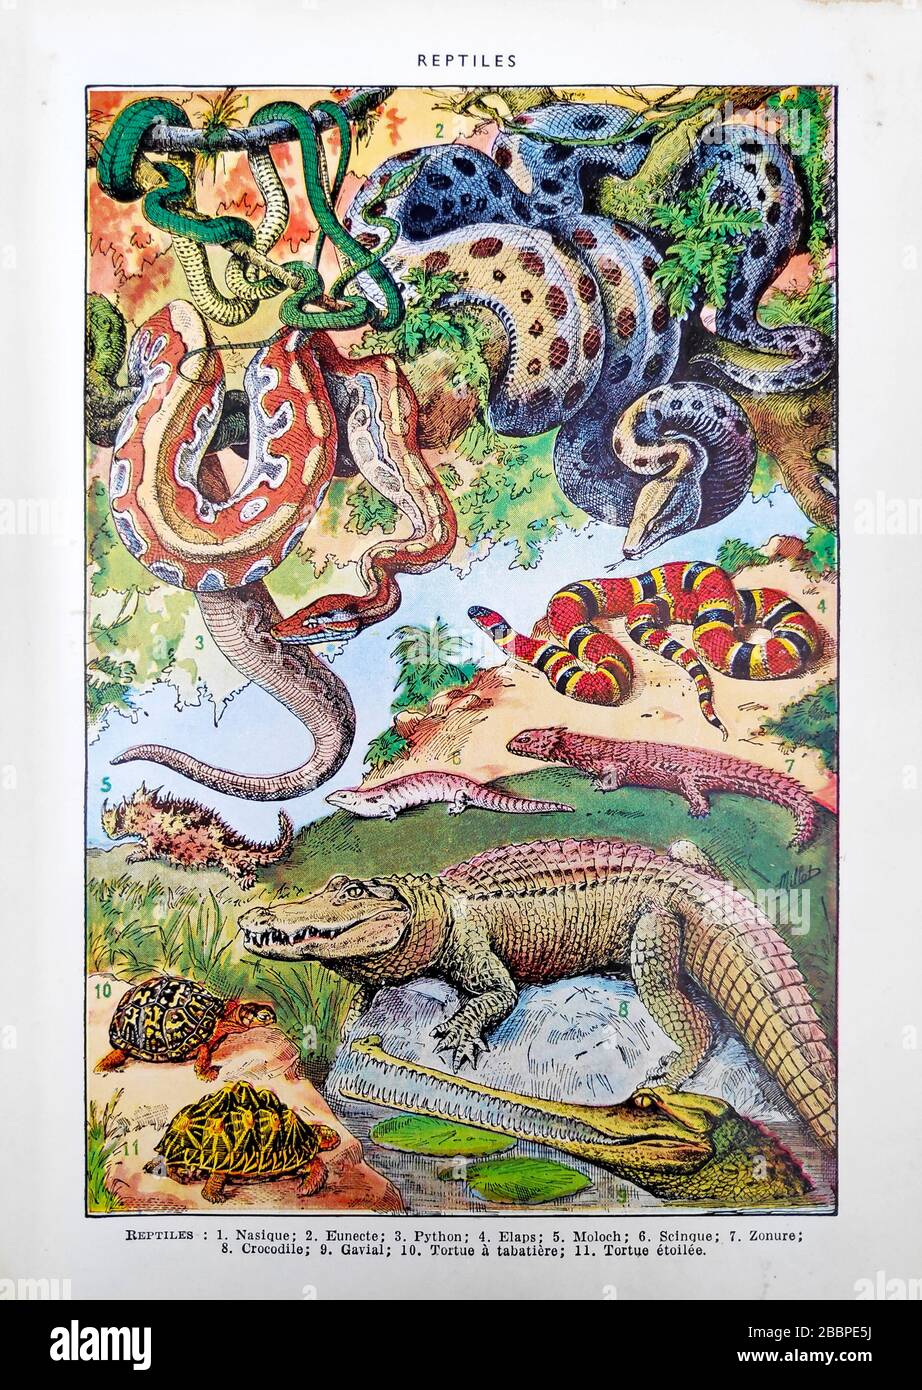 Old illustration about reptiles by Adolphe Philippe Millot printed in the late 19th century. Stock Photo